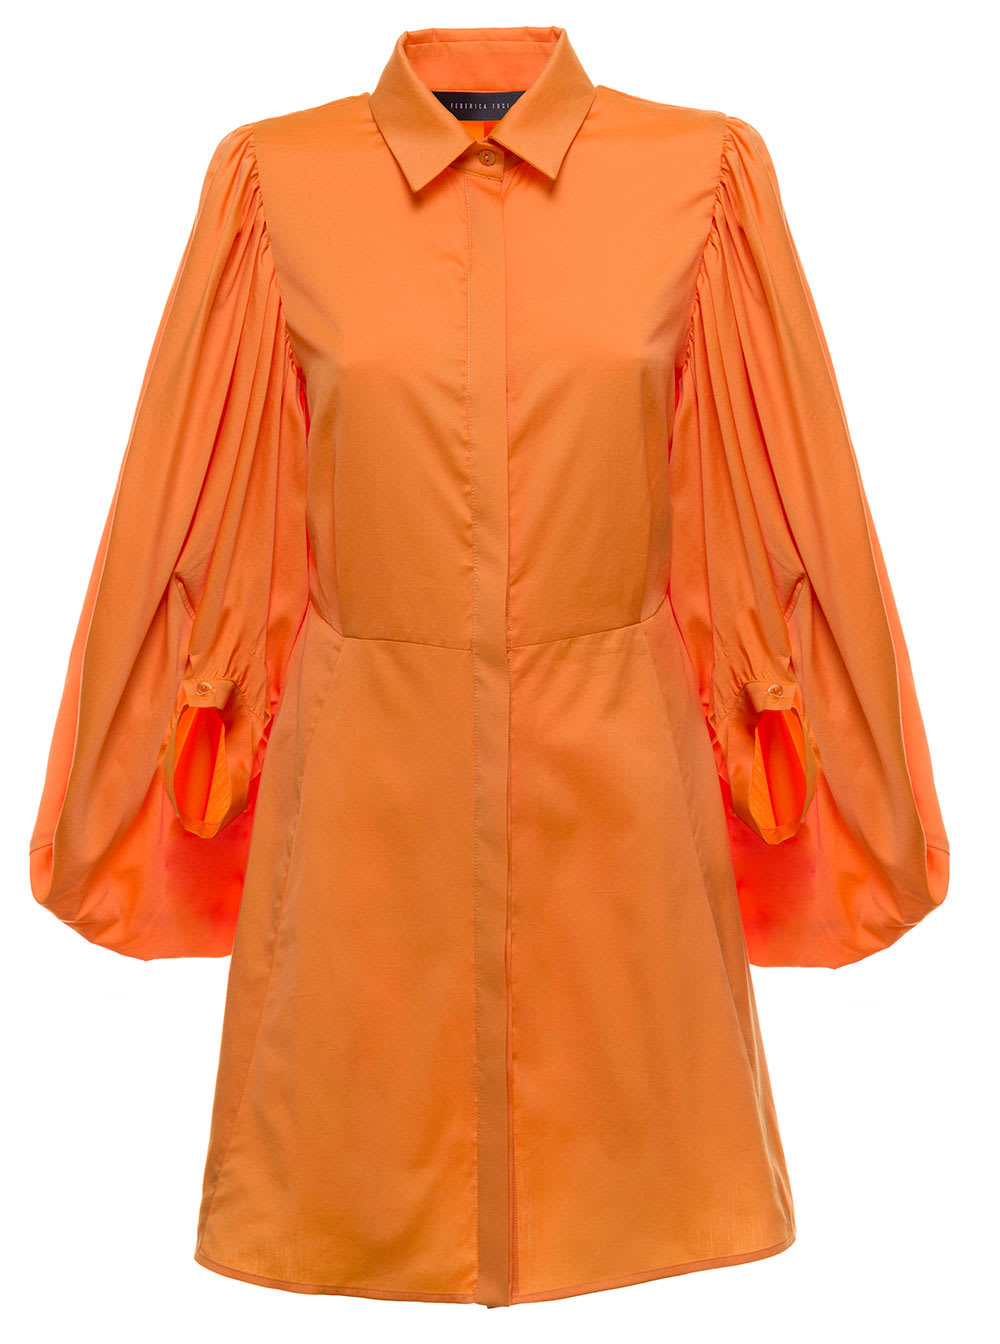 Federica Tosi Orange Cotton And Silk Dress With Balloon Sleeves